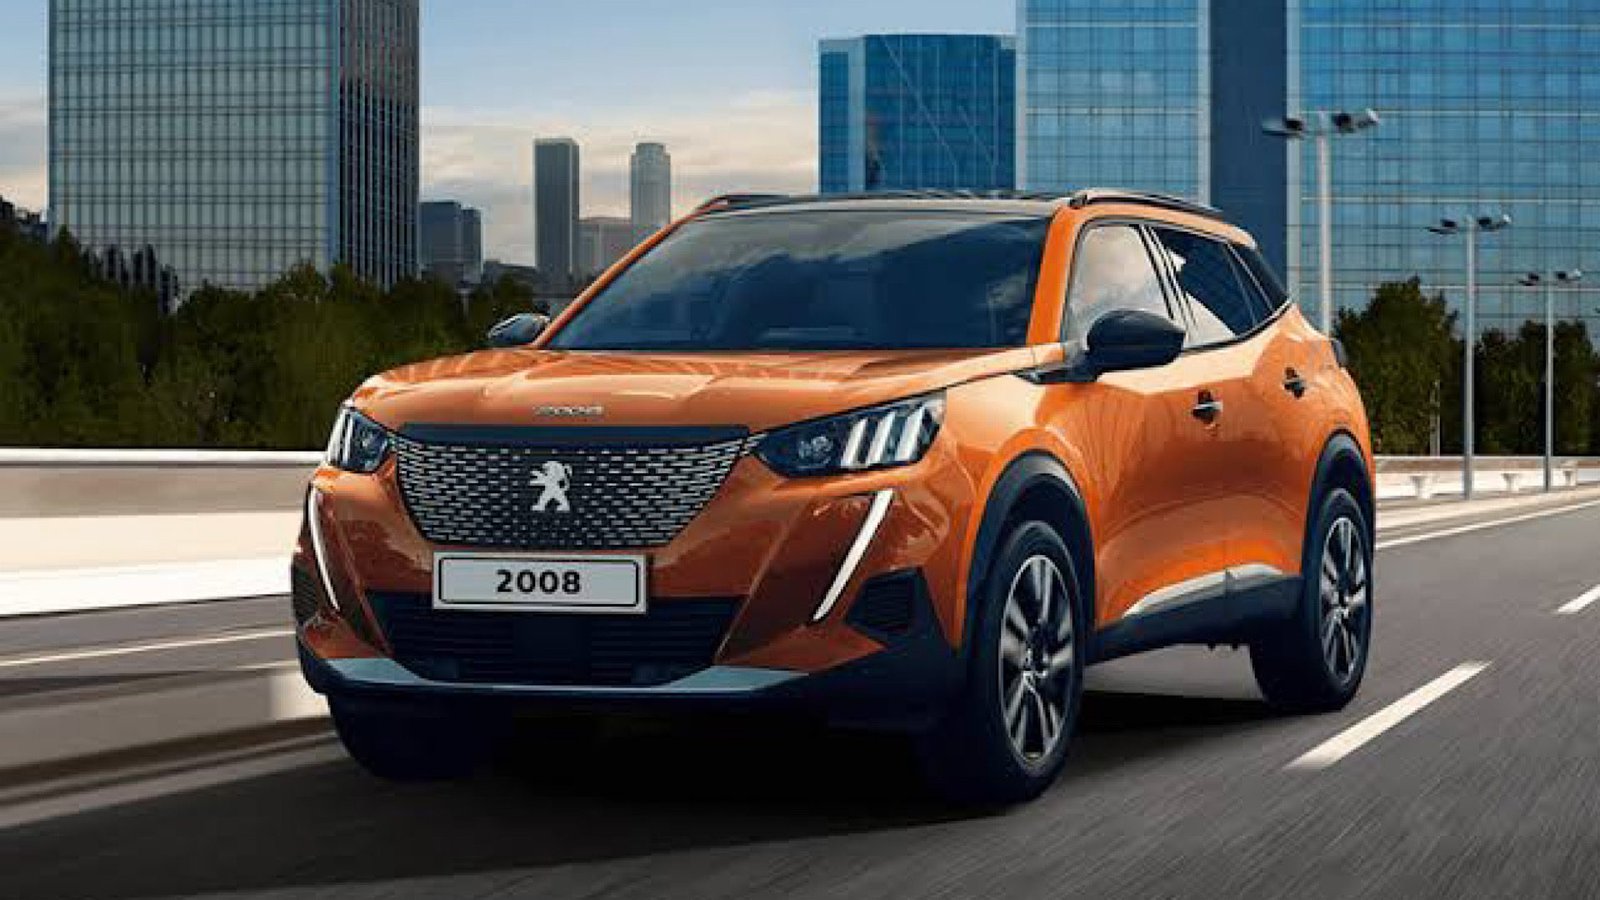 You can now buy Peugeot 2008 on easy instalments